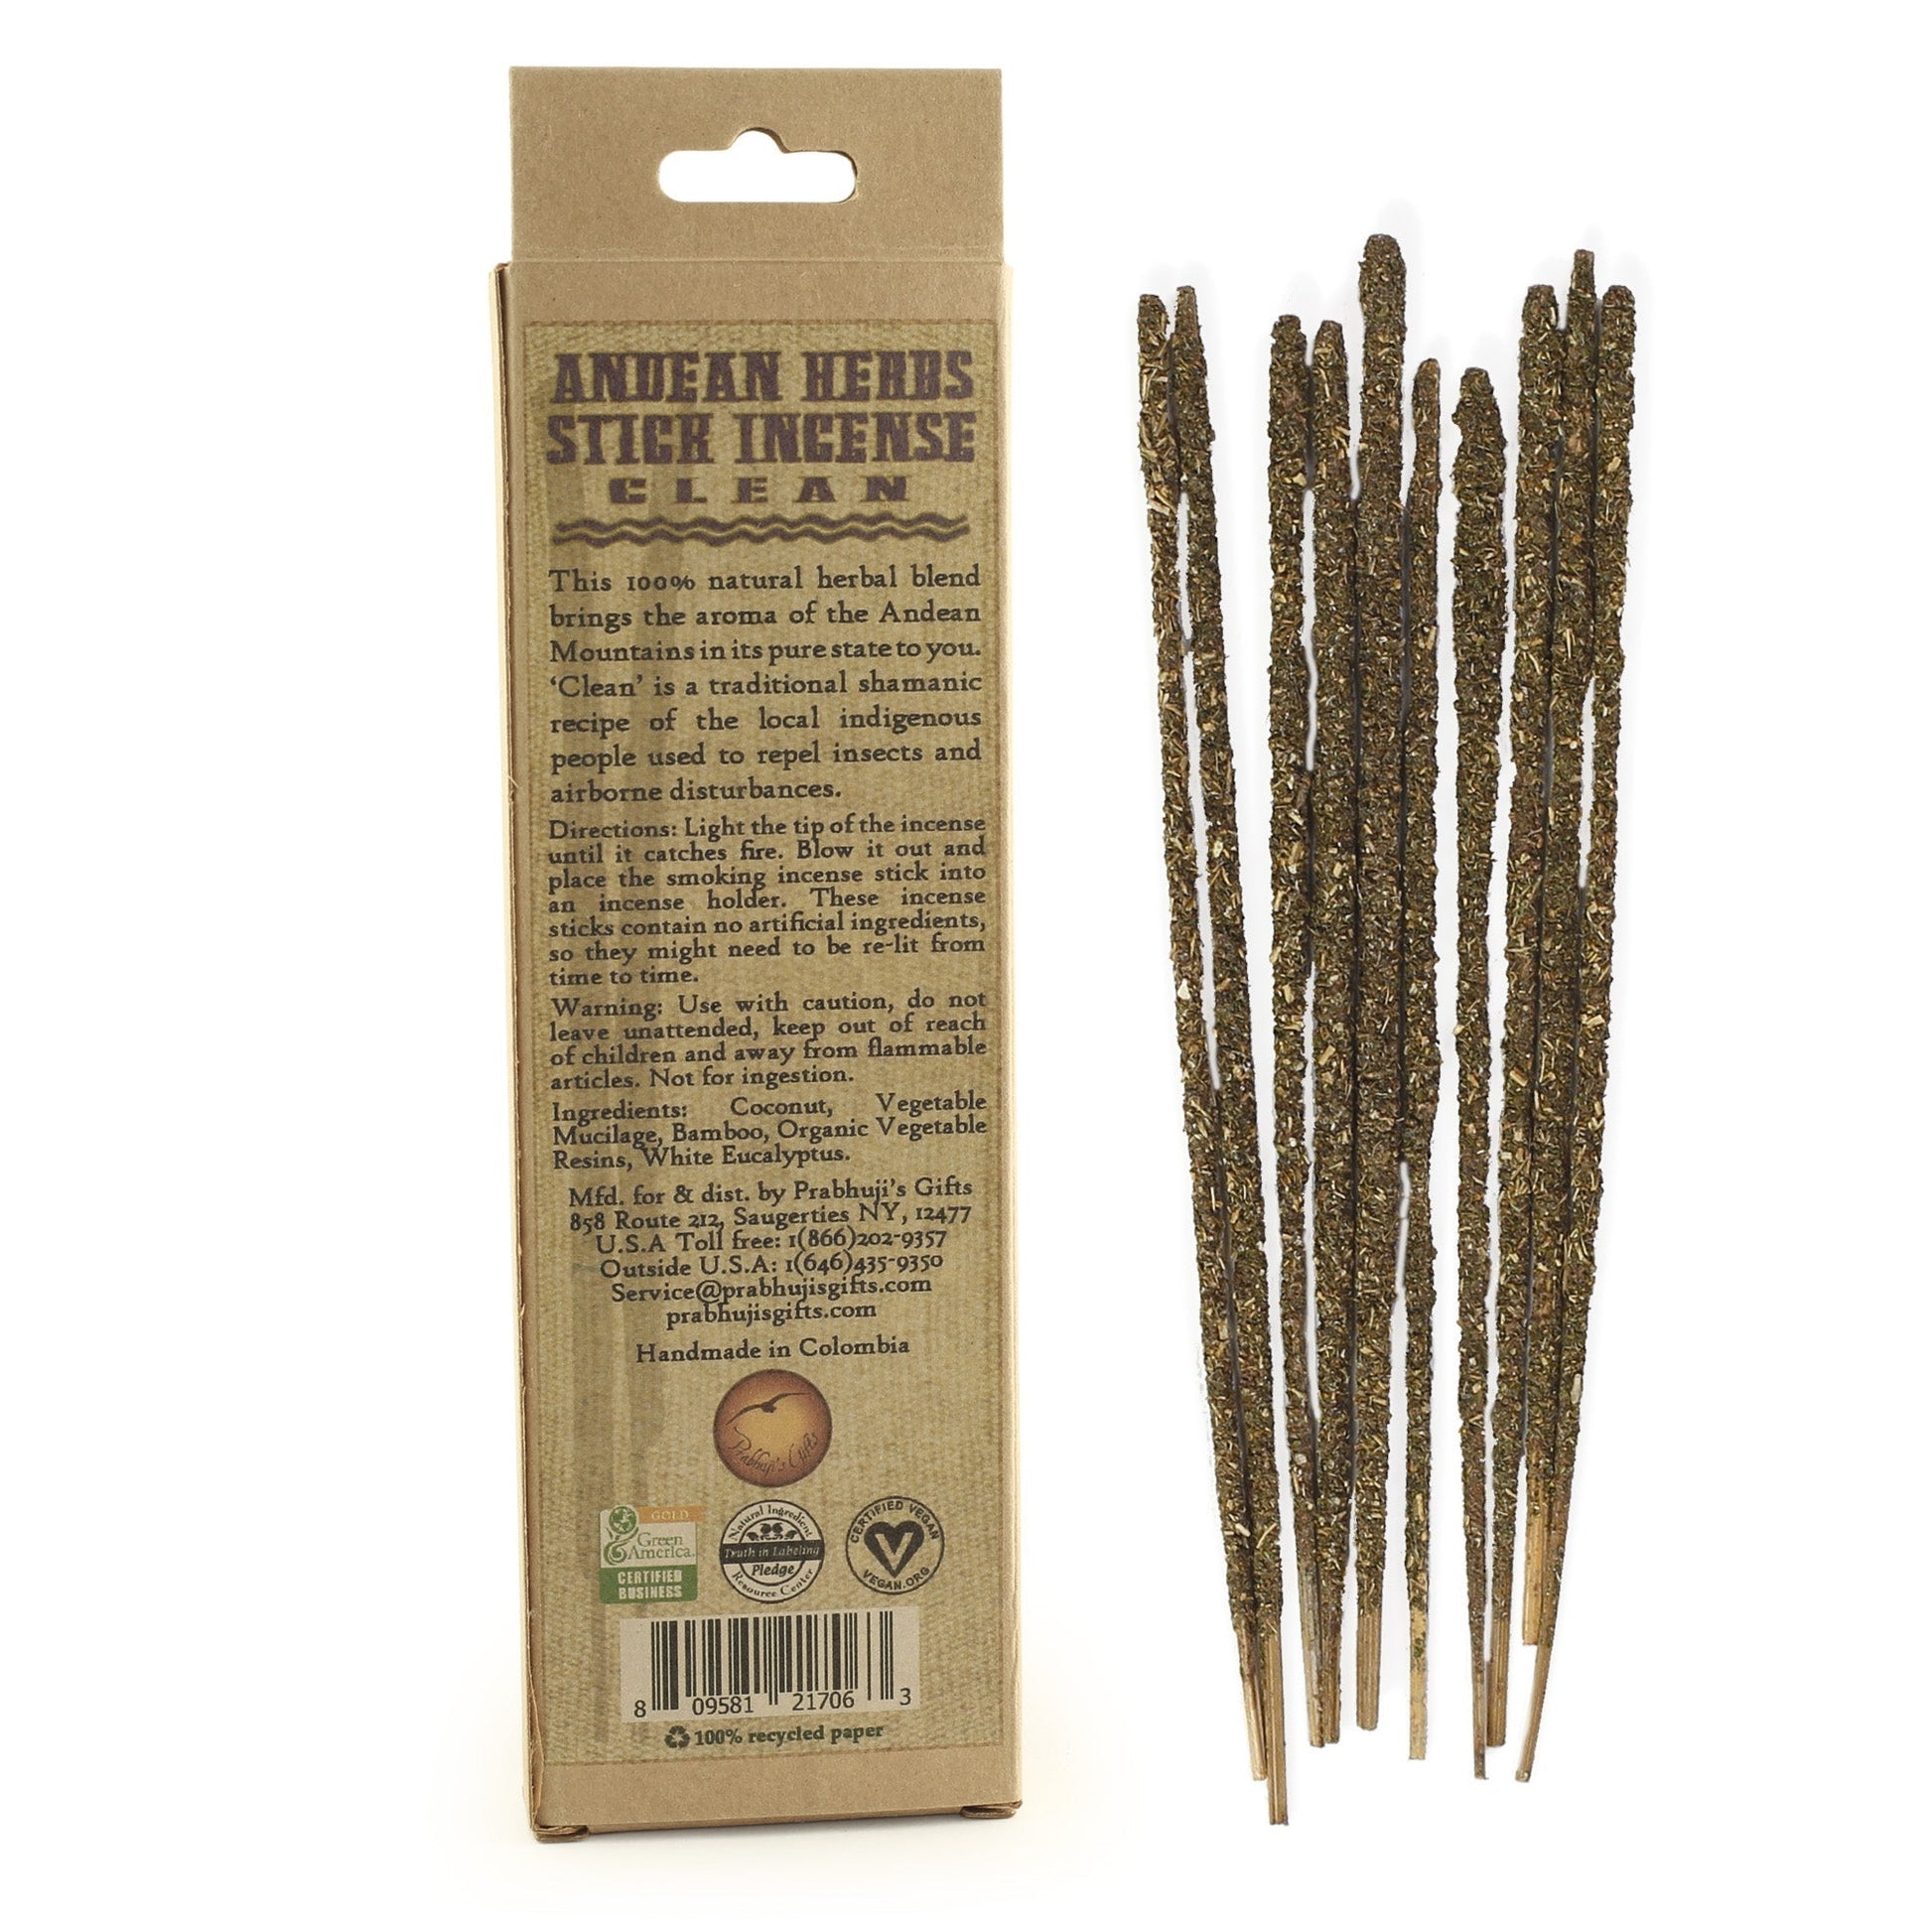 Smudging Incense - Clean - Andean Herbs Incense Sticks - Environmental Cleansing - Tree Spirit Wellness